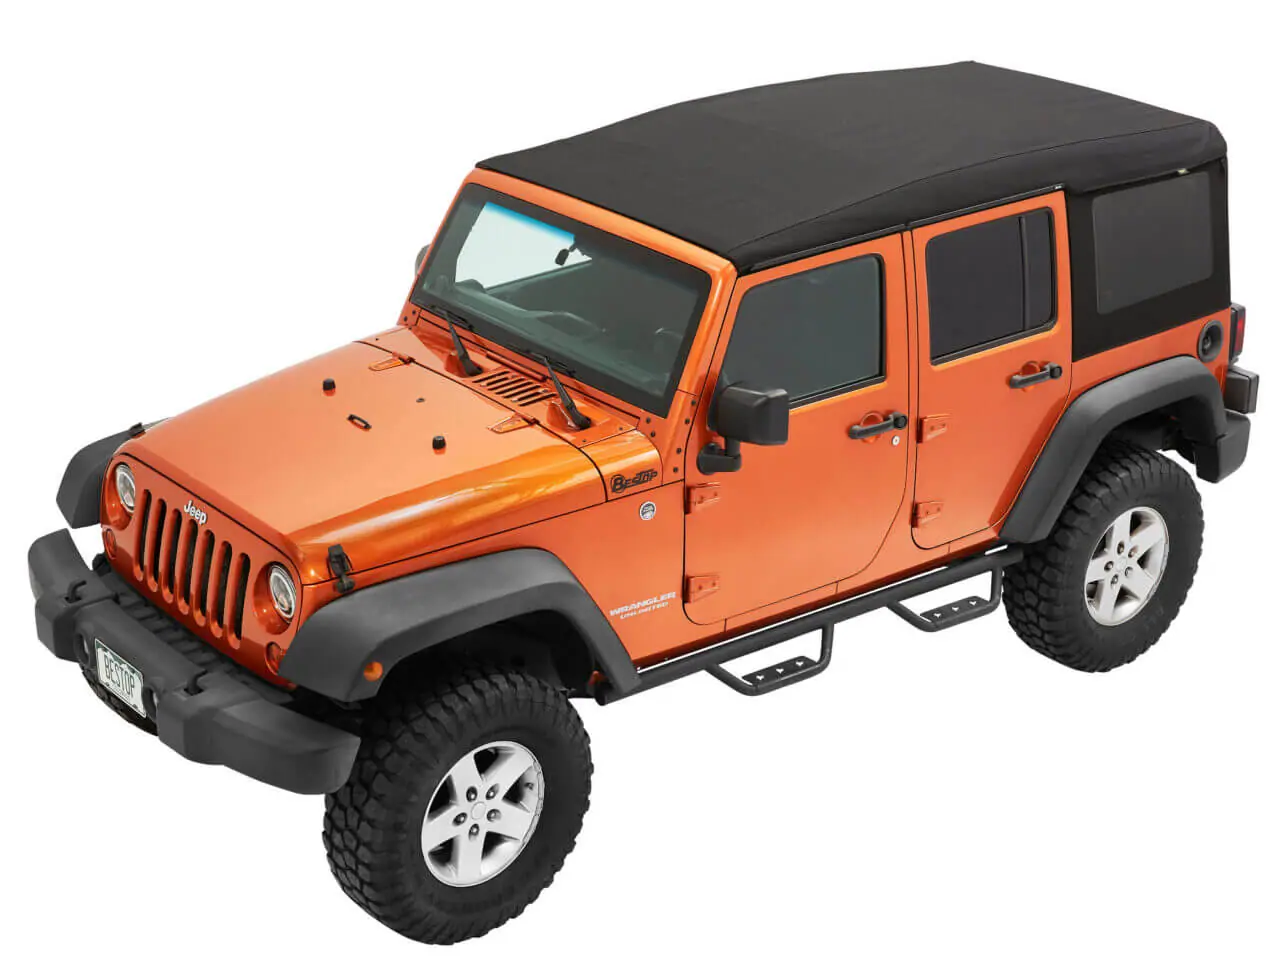 Is a Jeep Wrangler Soft Top a Bad Idea During Winter? - The Dirt by 4WP